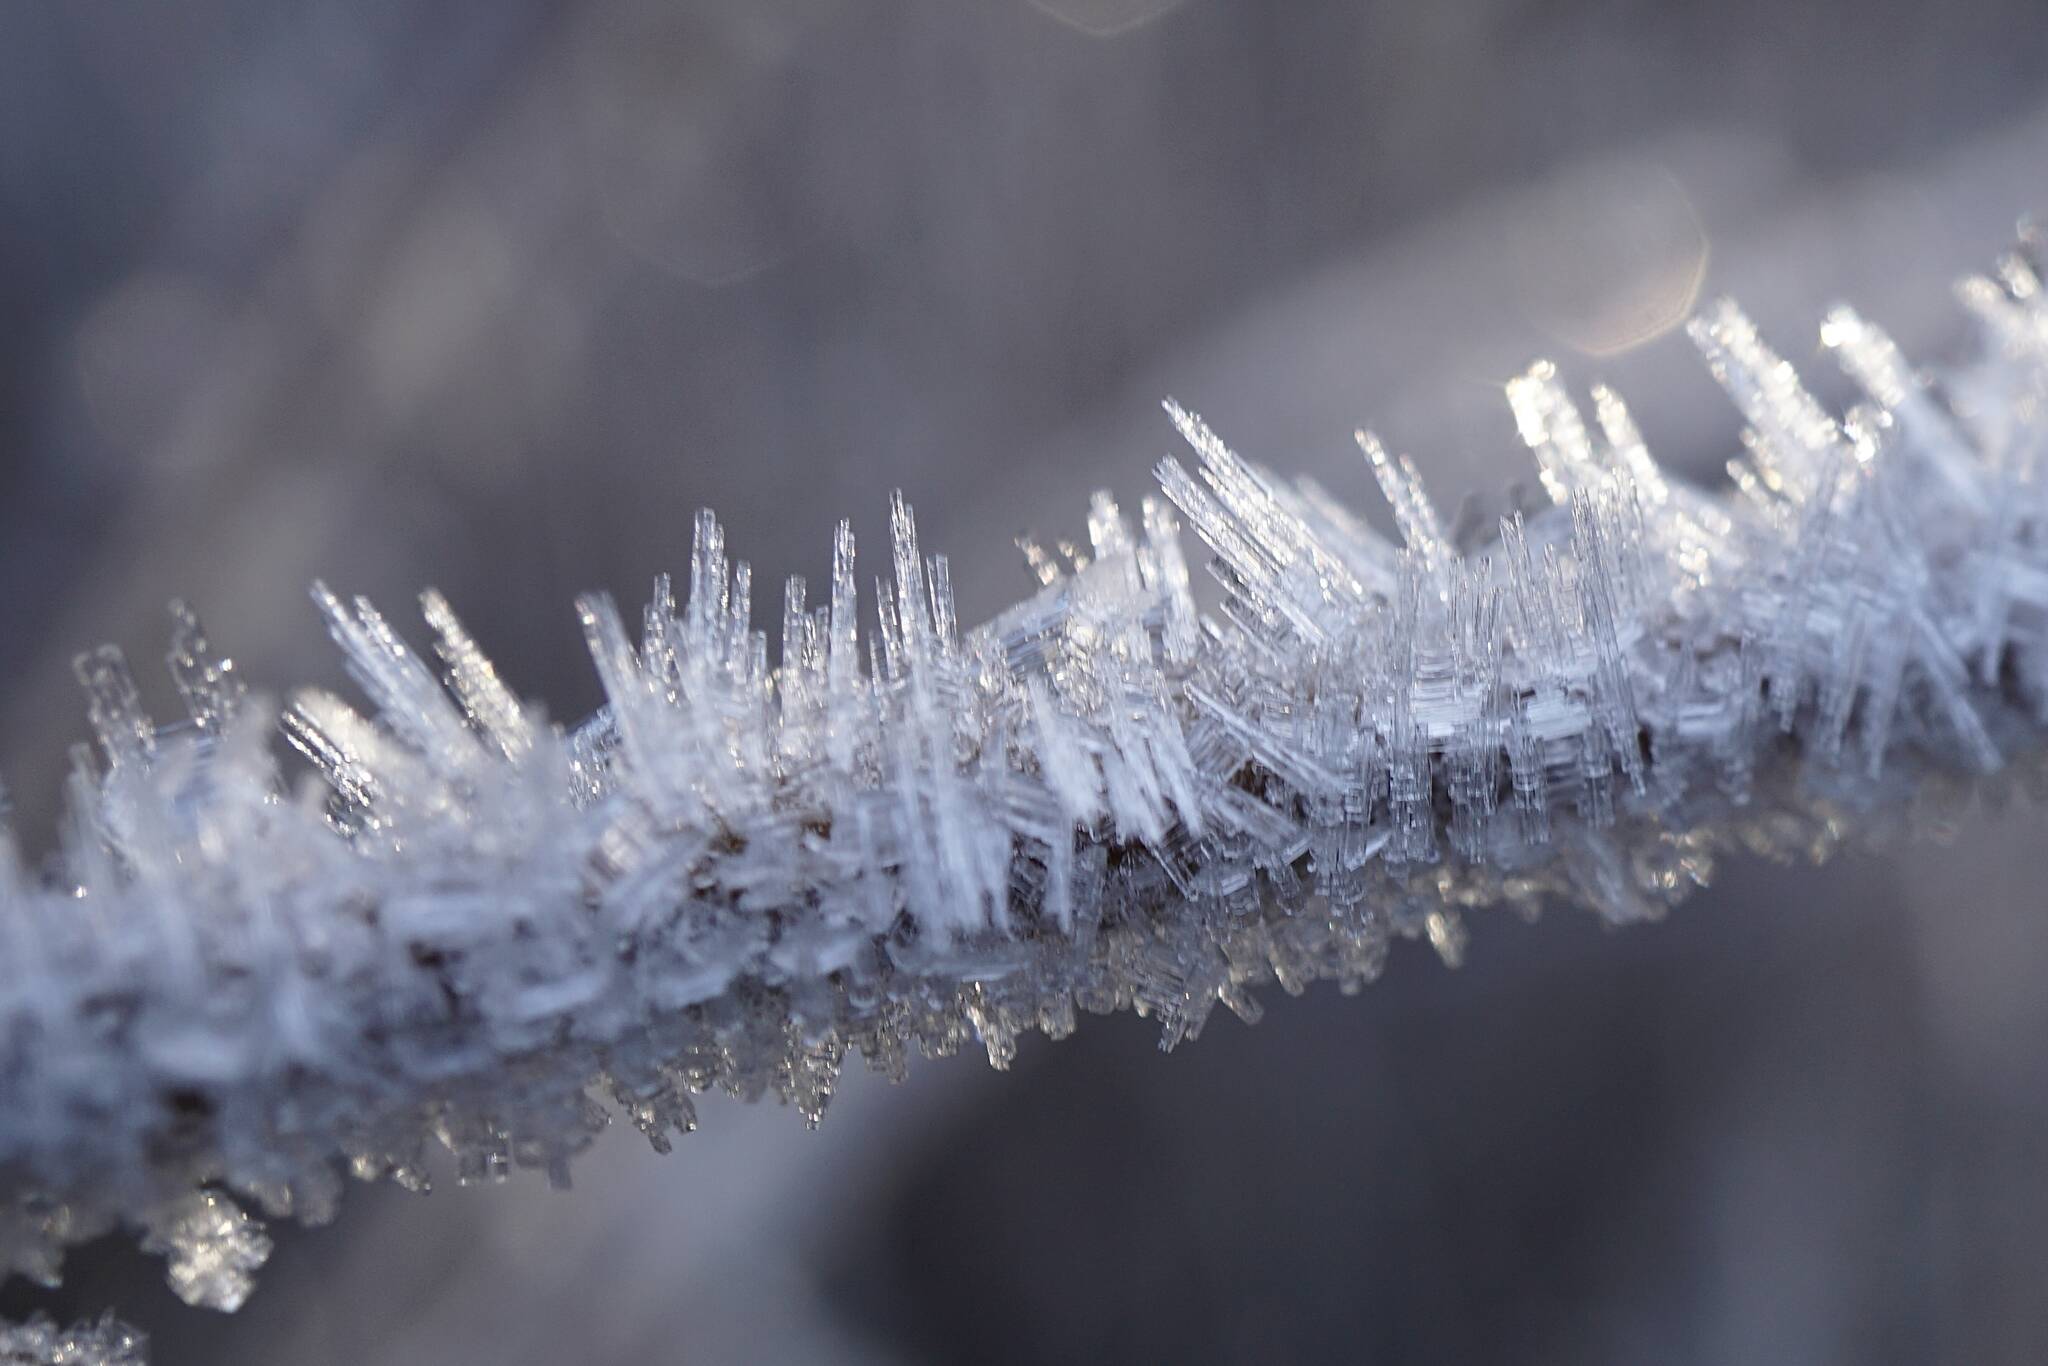 Hair frost forms on a branch on a chilly winter morning. (Courtesy Photo / Marti Crutcher)